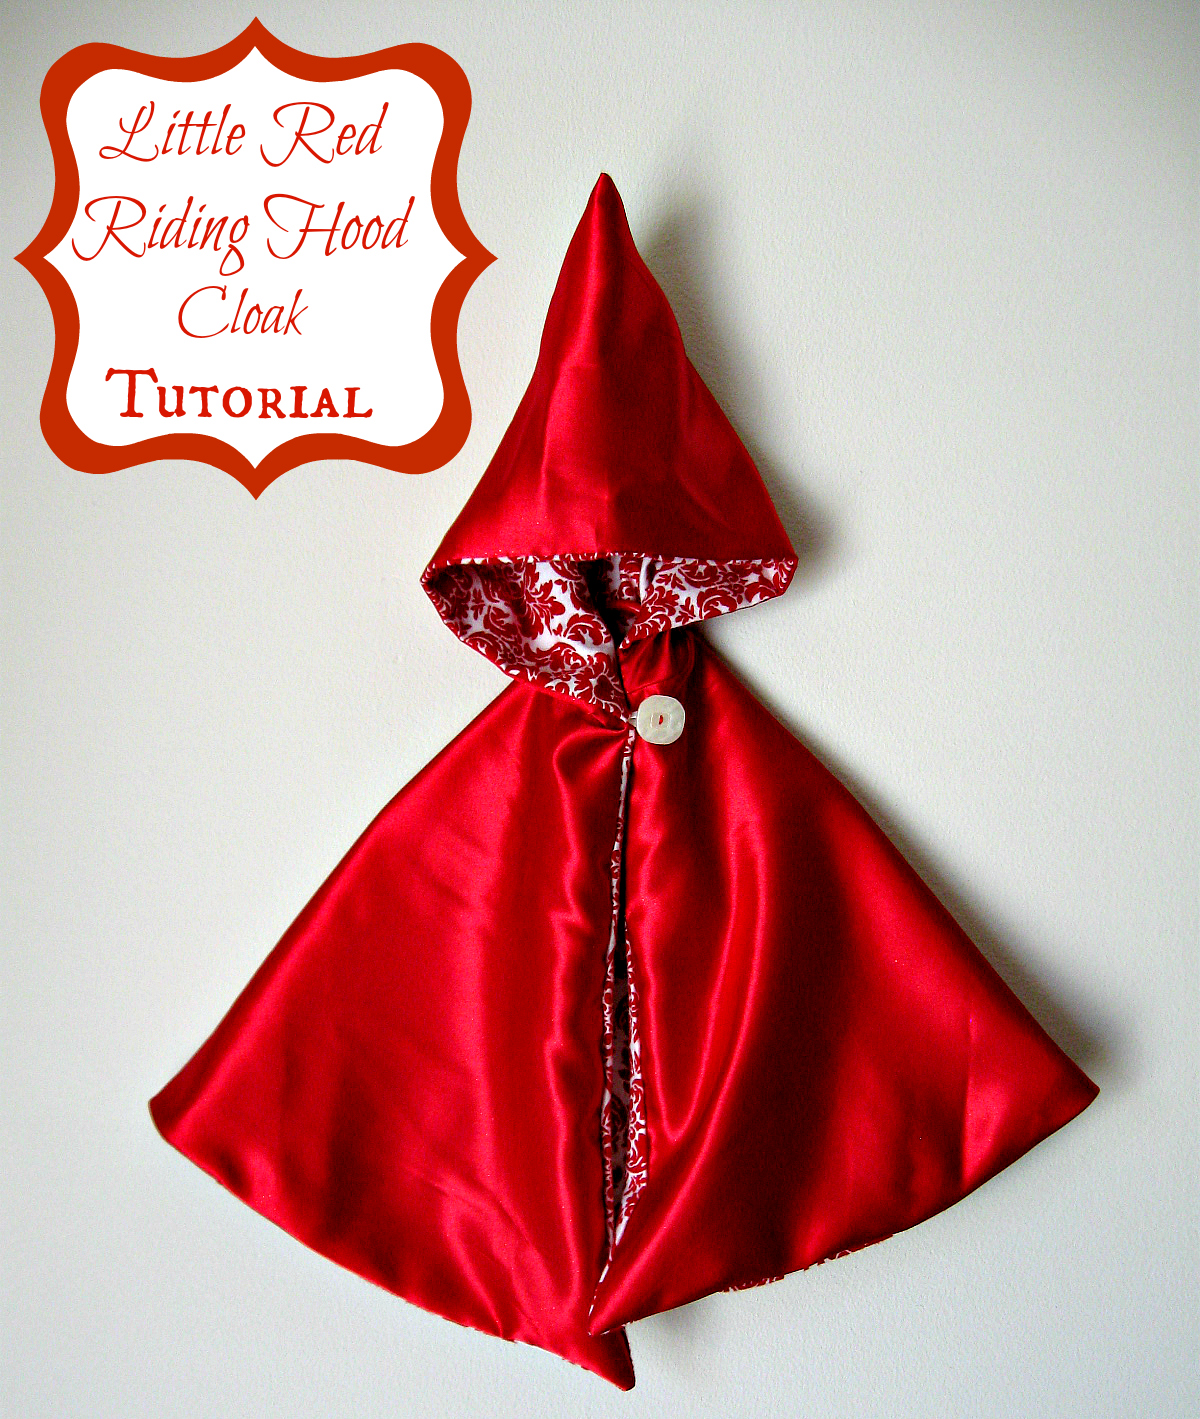 freshly-completed-little-red-riding-hood-cloak-tutorial